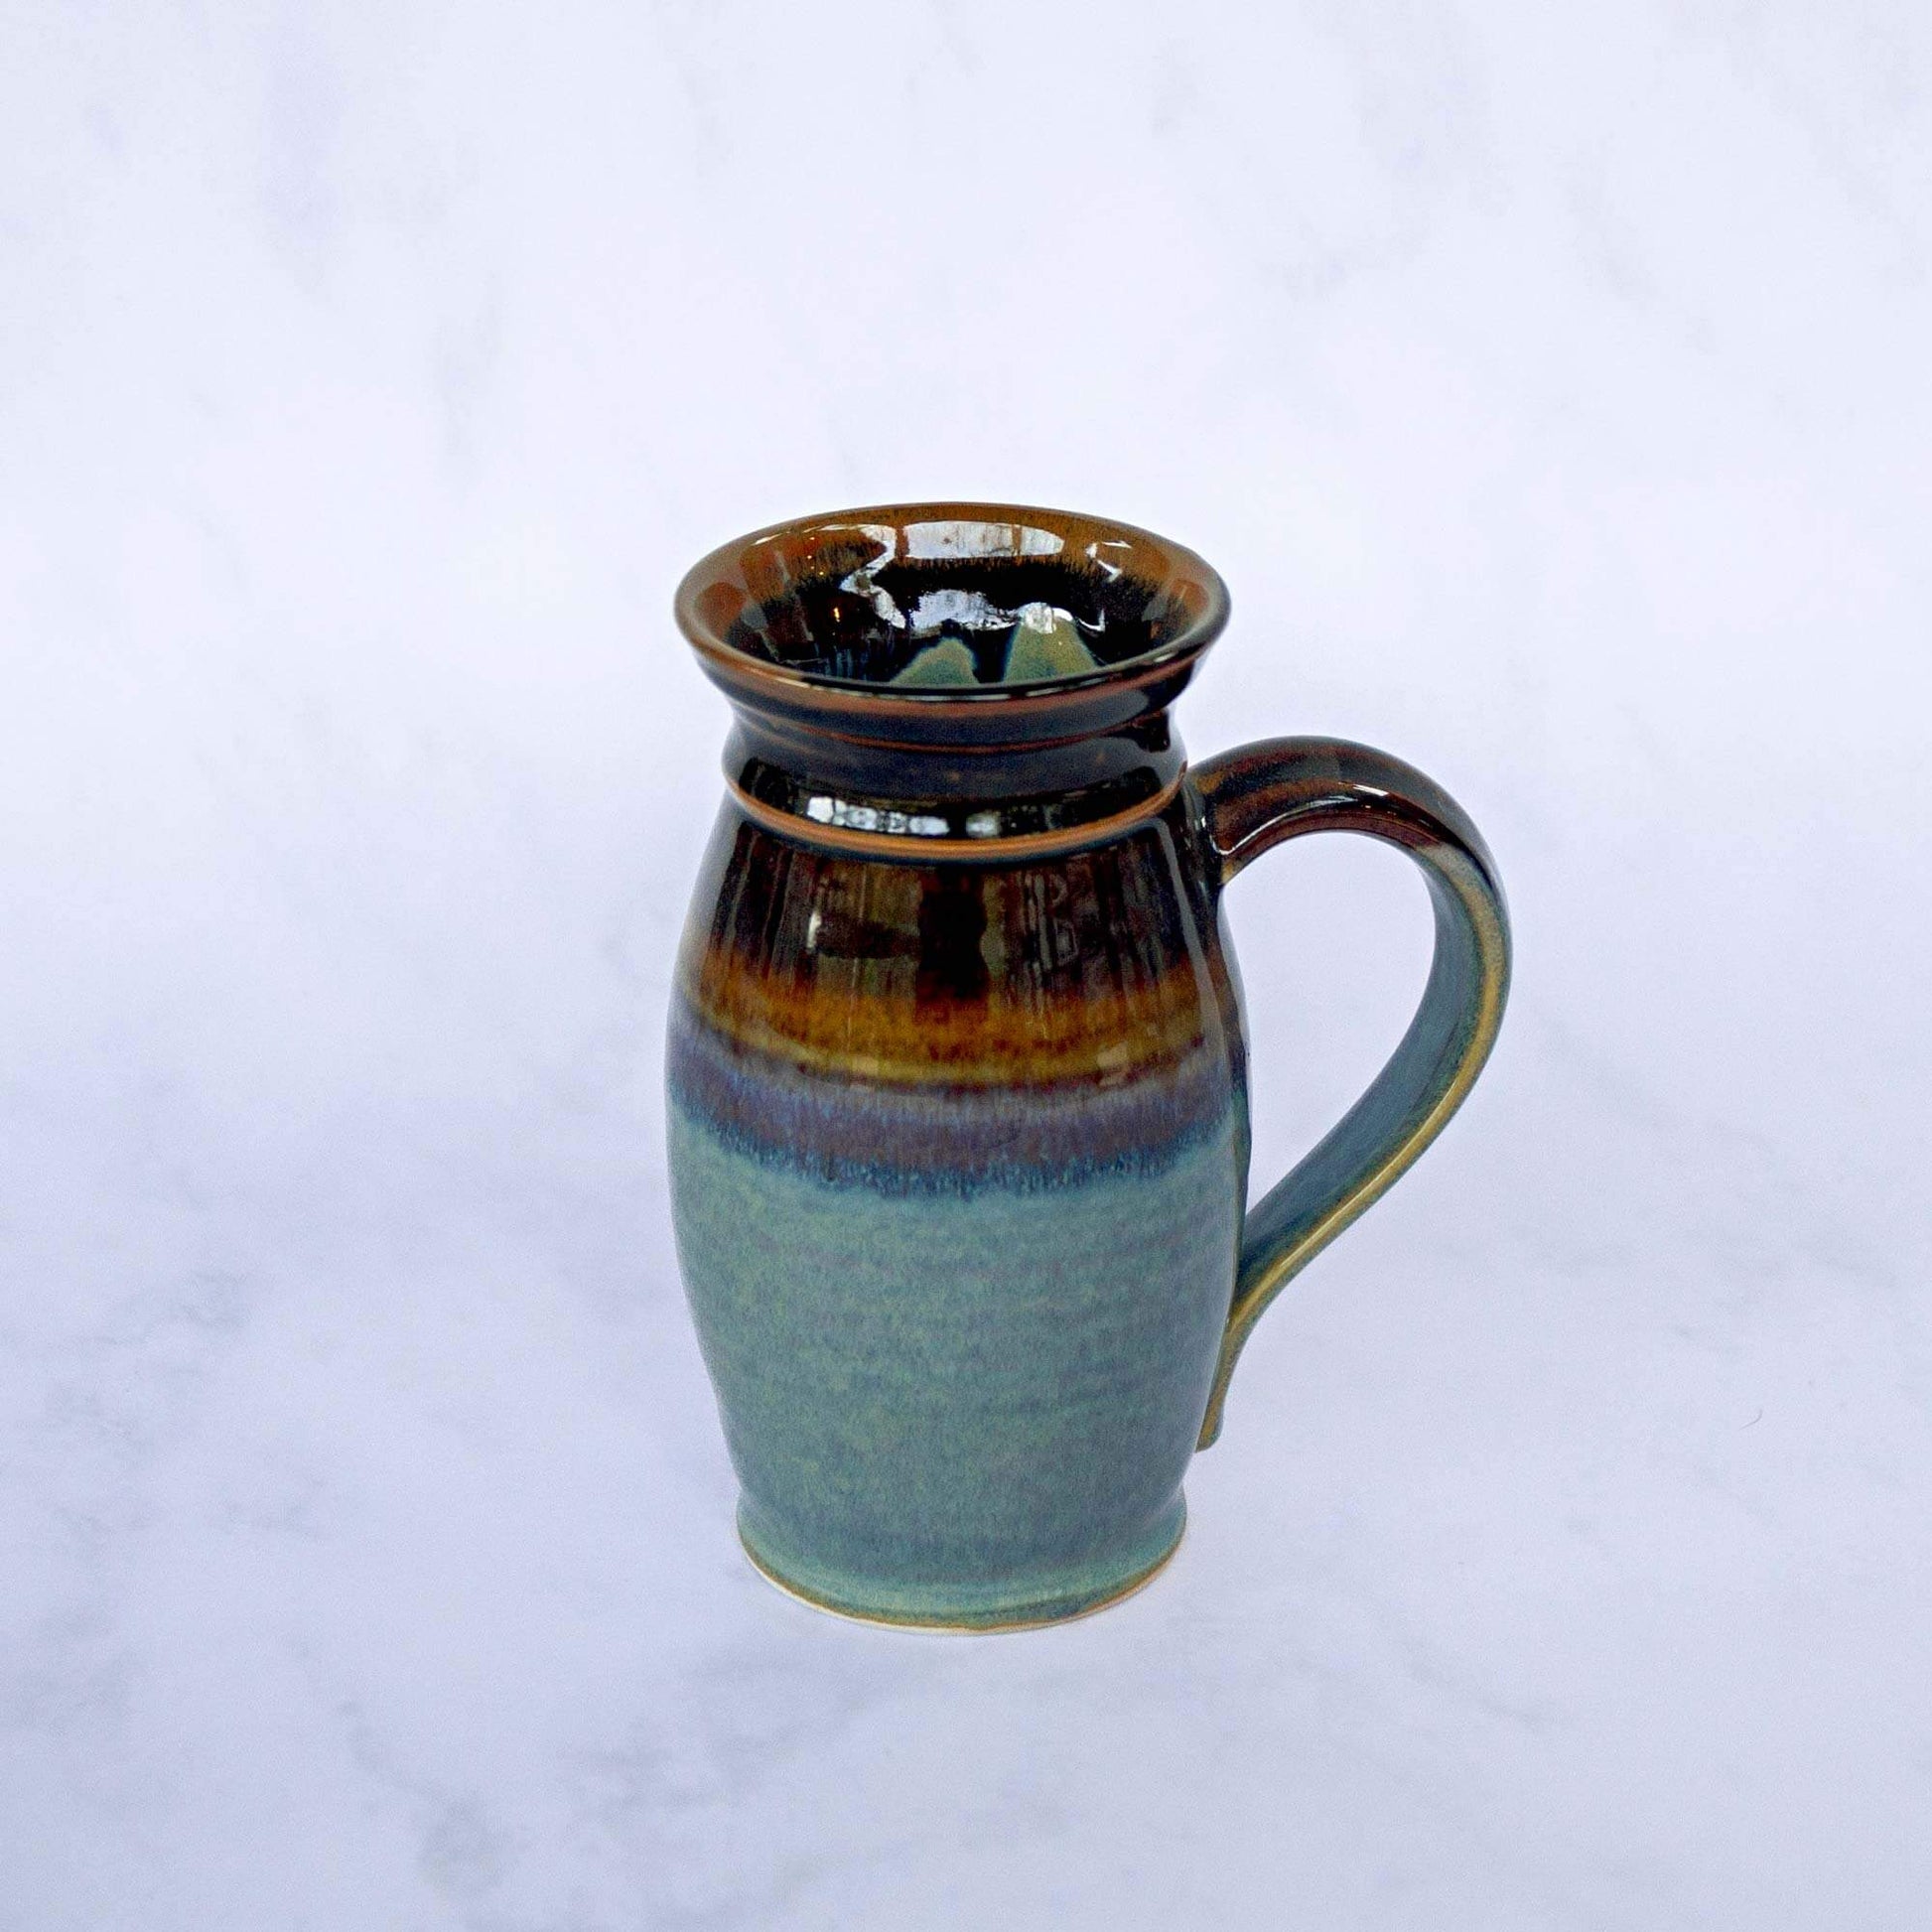 Handmade Pottery Beer Stein in Purple Hamada pattern made by Georgetown Pottery in Maine